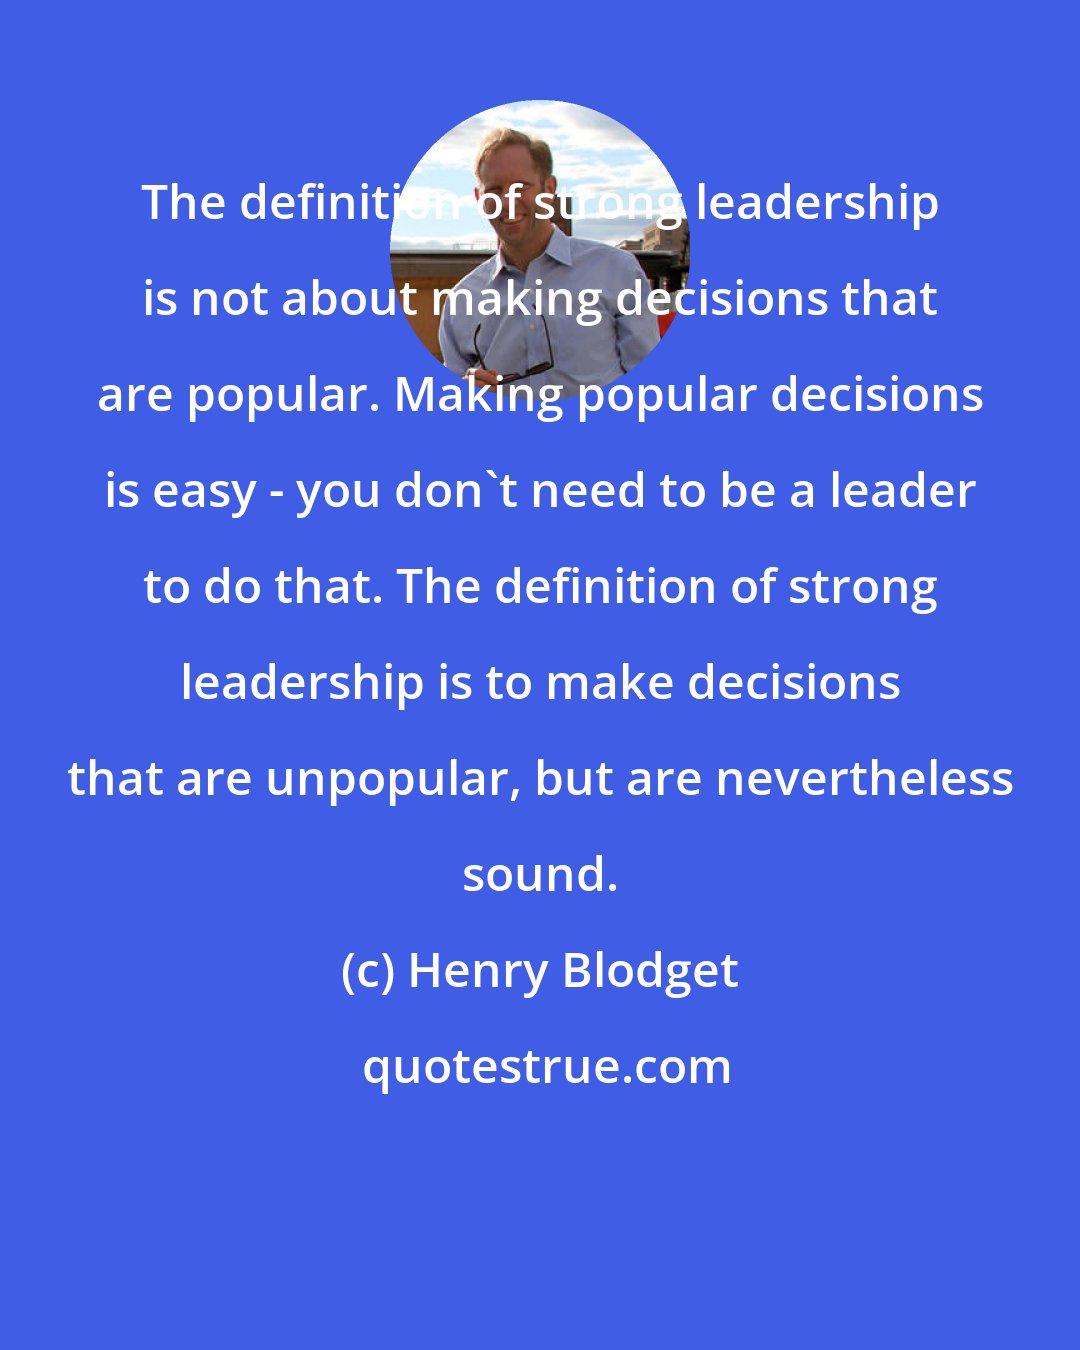 Henry Blodget: The definition of strong leadership is not about making decisions that are popular. Making popular decisions is easy - you don't need to be a leader to do that. The definition of strong leadership is to make decisions that are unpopular, but are nevertheless sound.